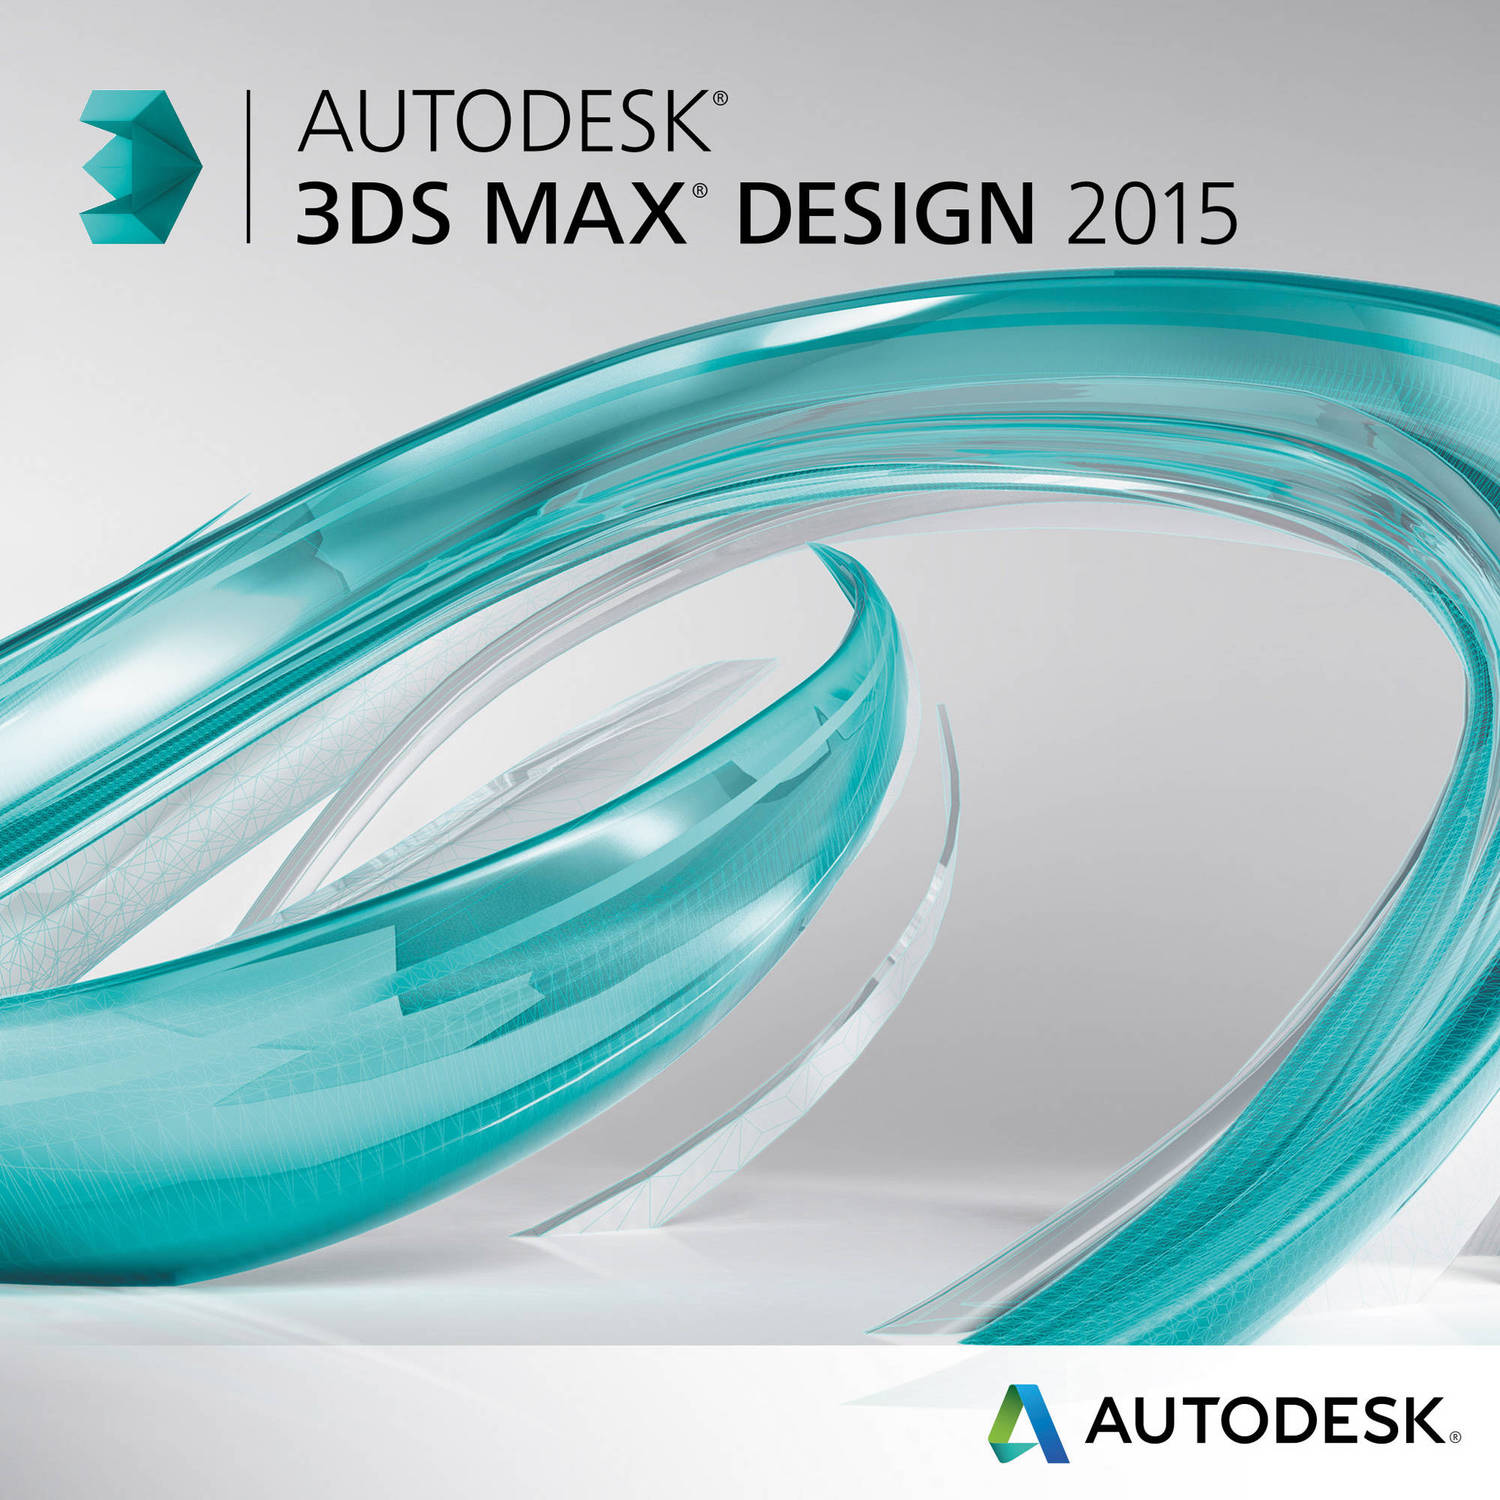 3ds max 2015 64 bit free download with crack kickass